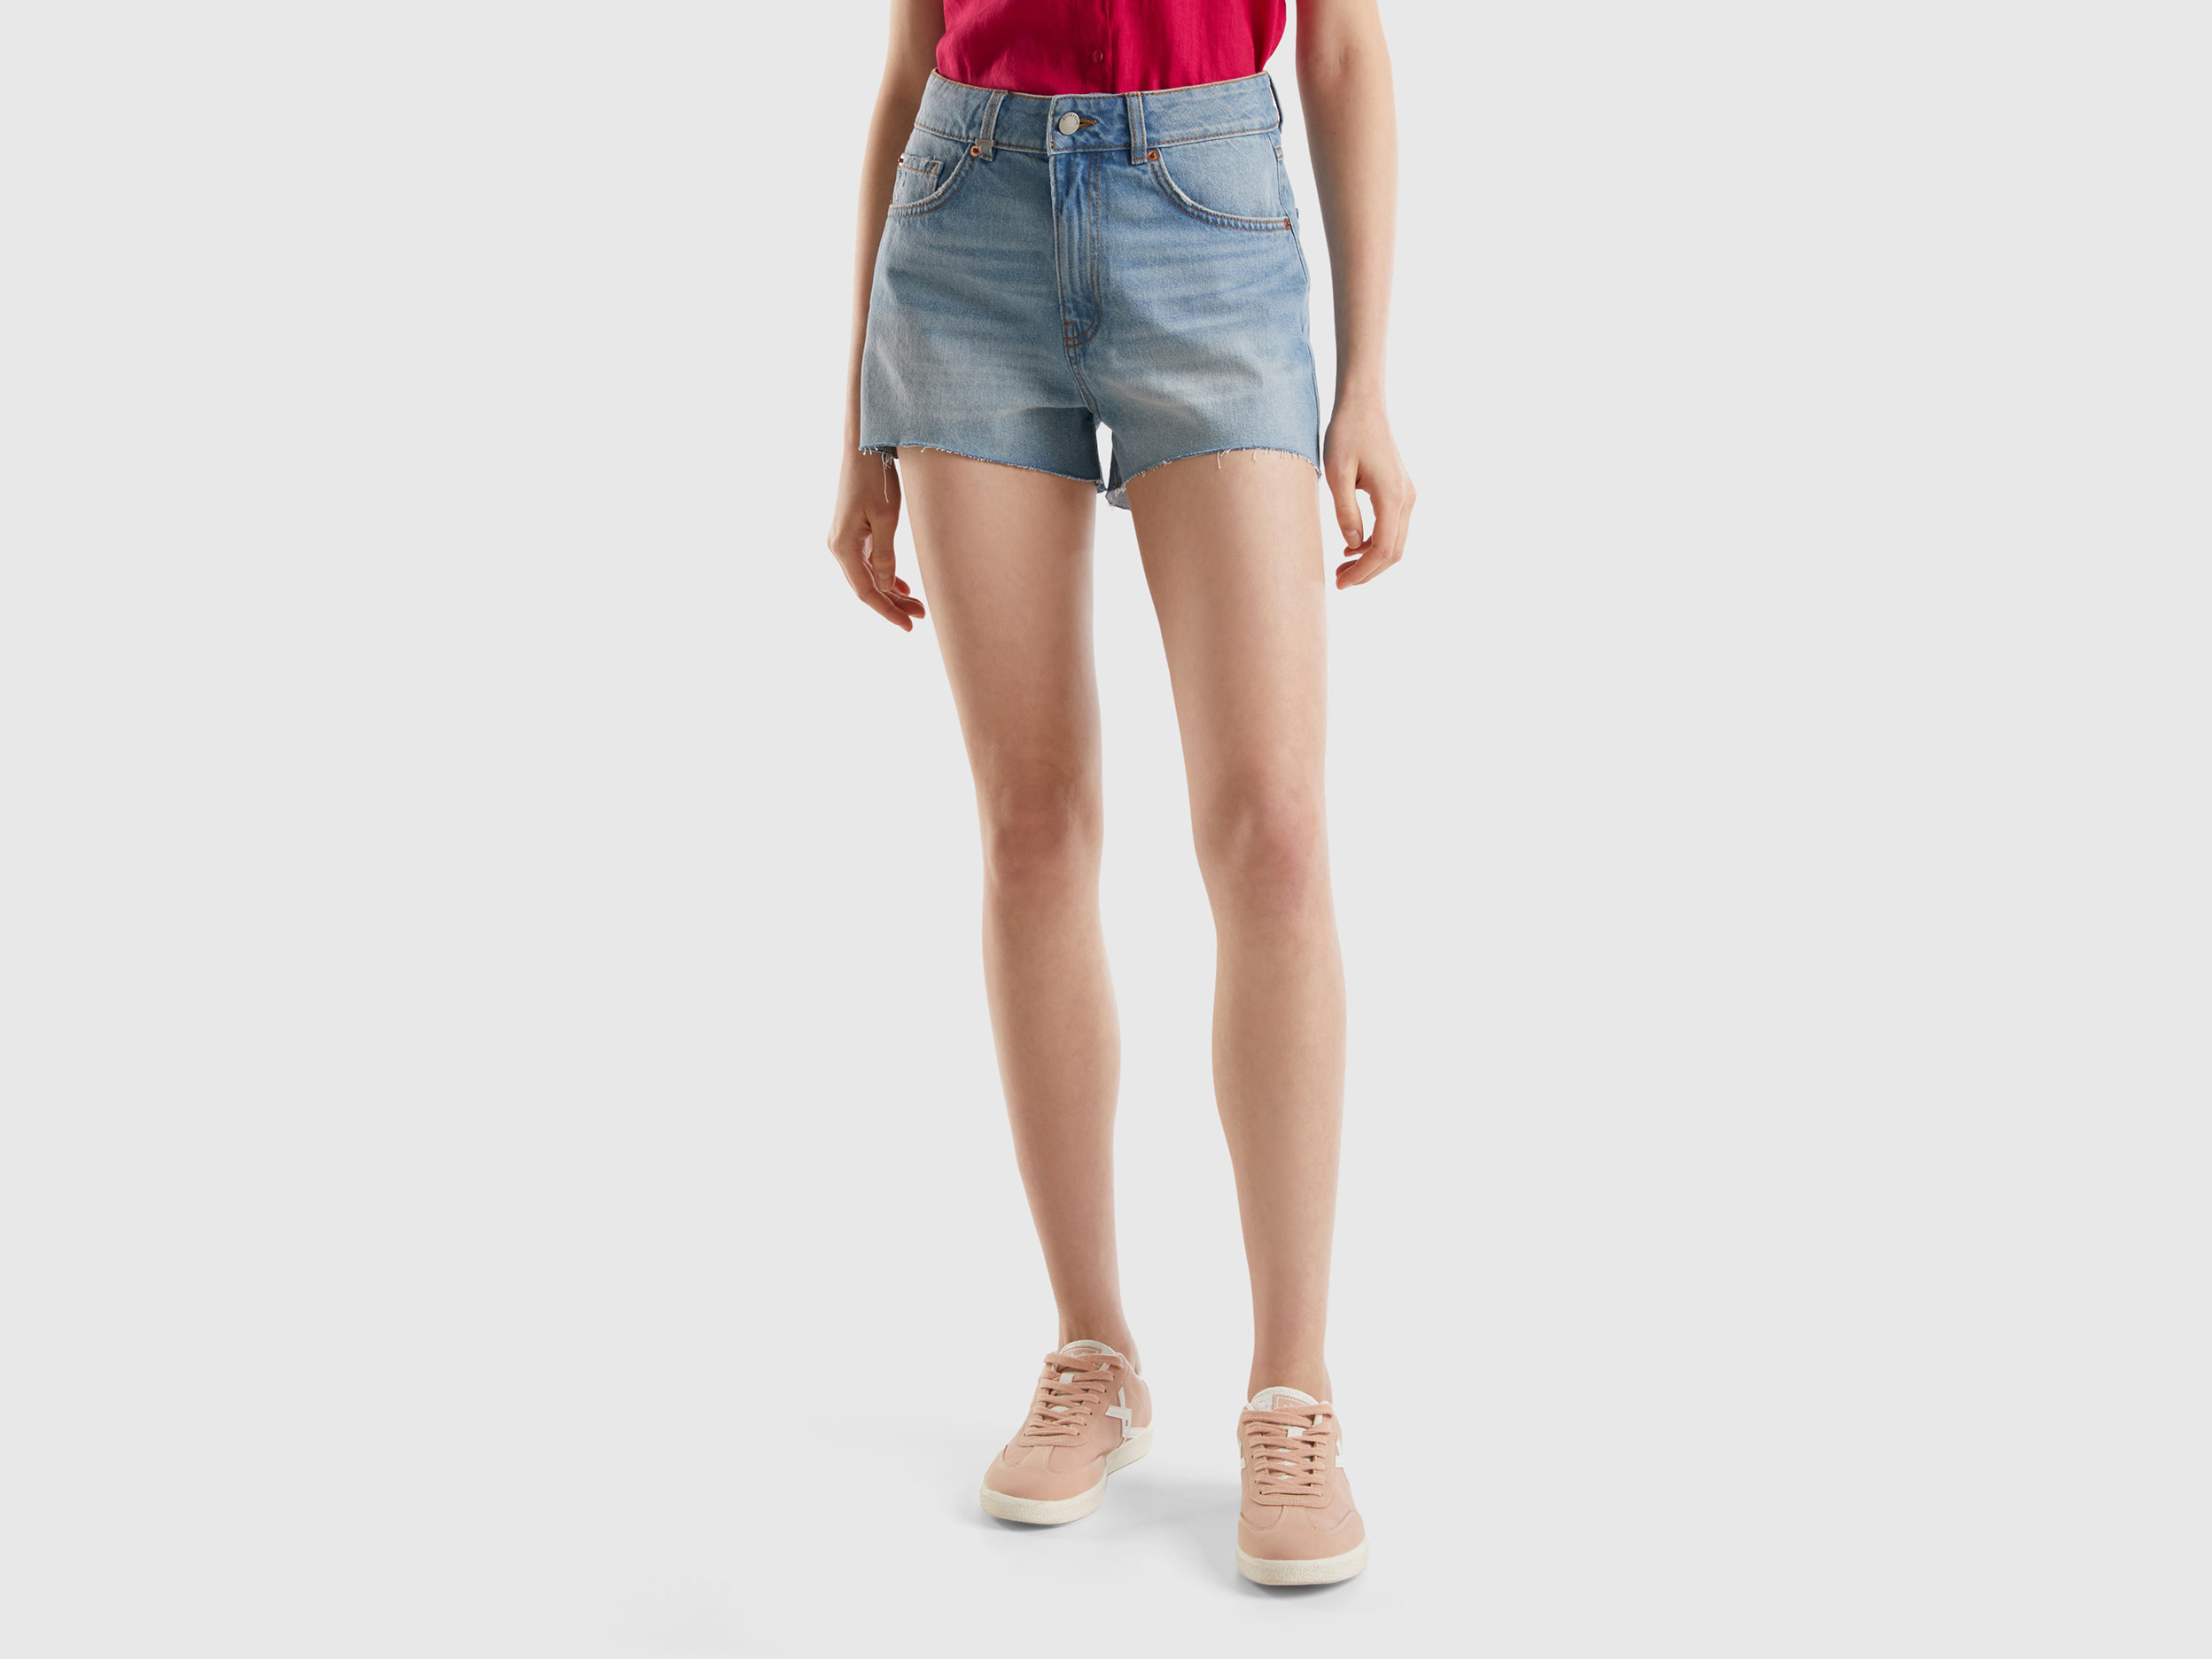 Image of Benetton, Frayed Shorts In Recycled Cotton Blend, size 33, Light Blue, Women